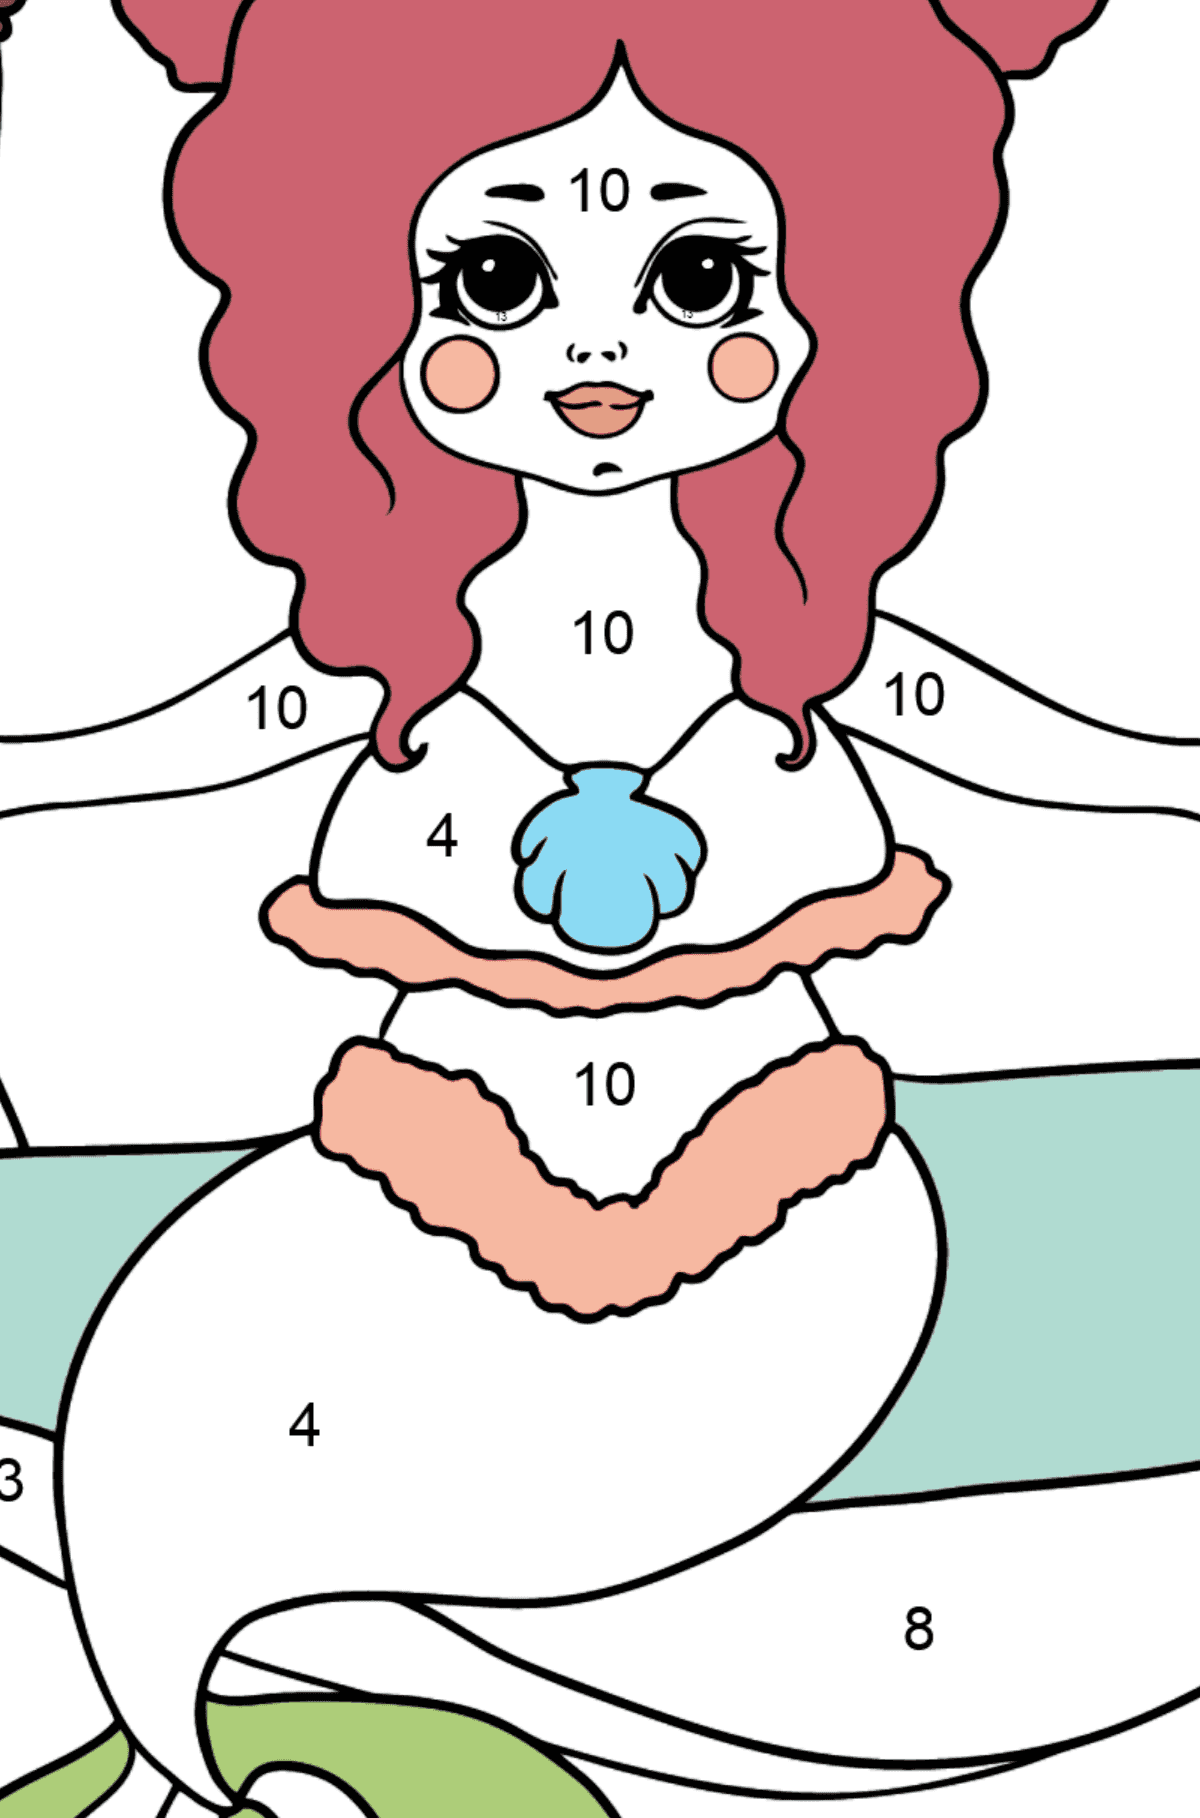 Mermaid and Two Fish coloring page - Coloring by Numbers for Kids